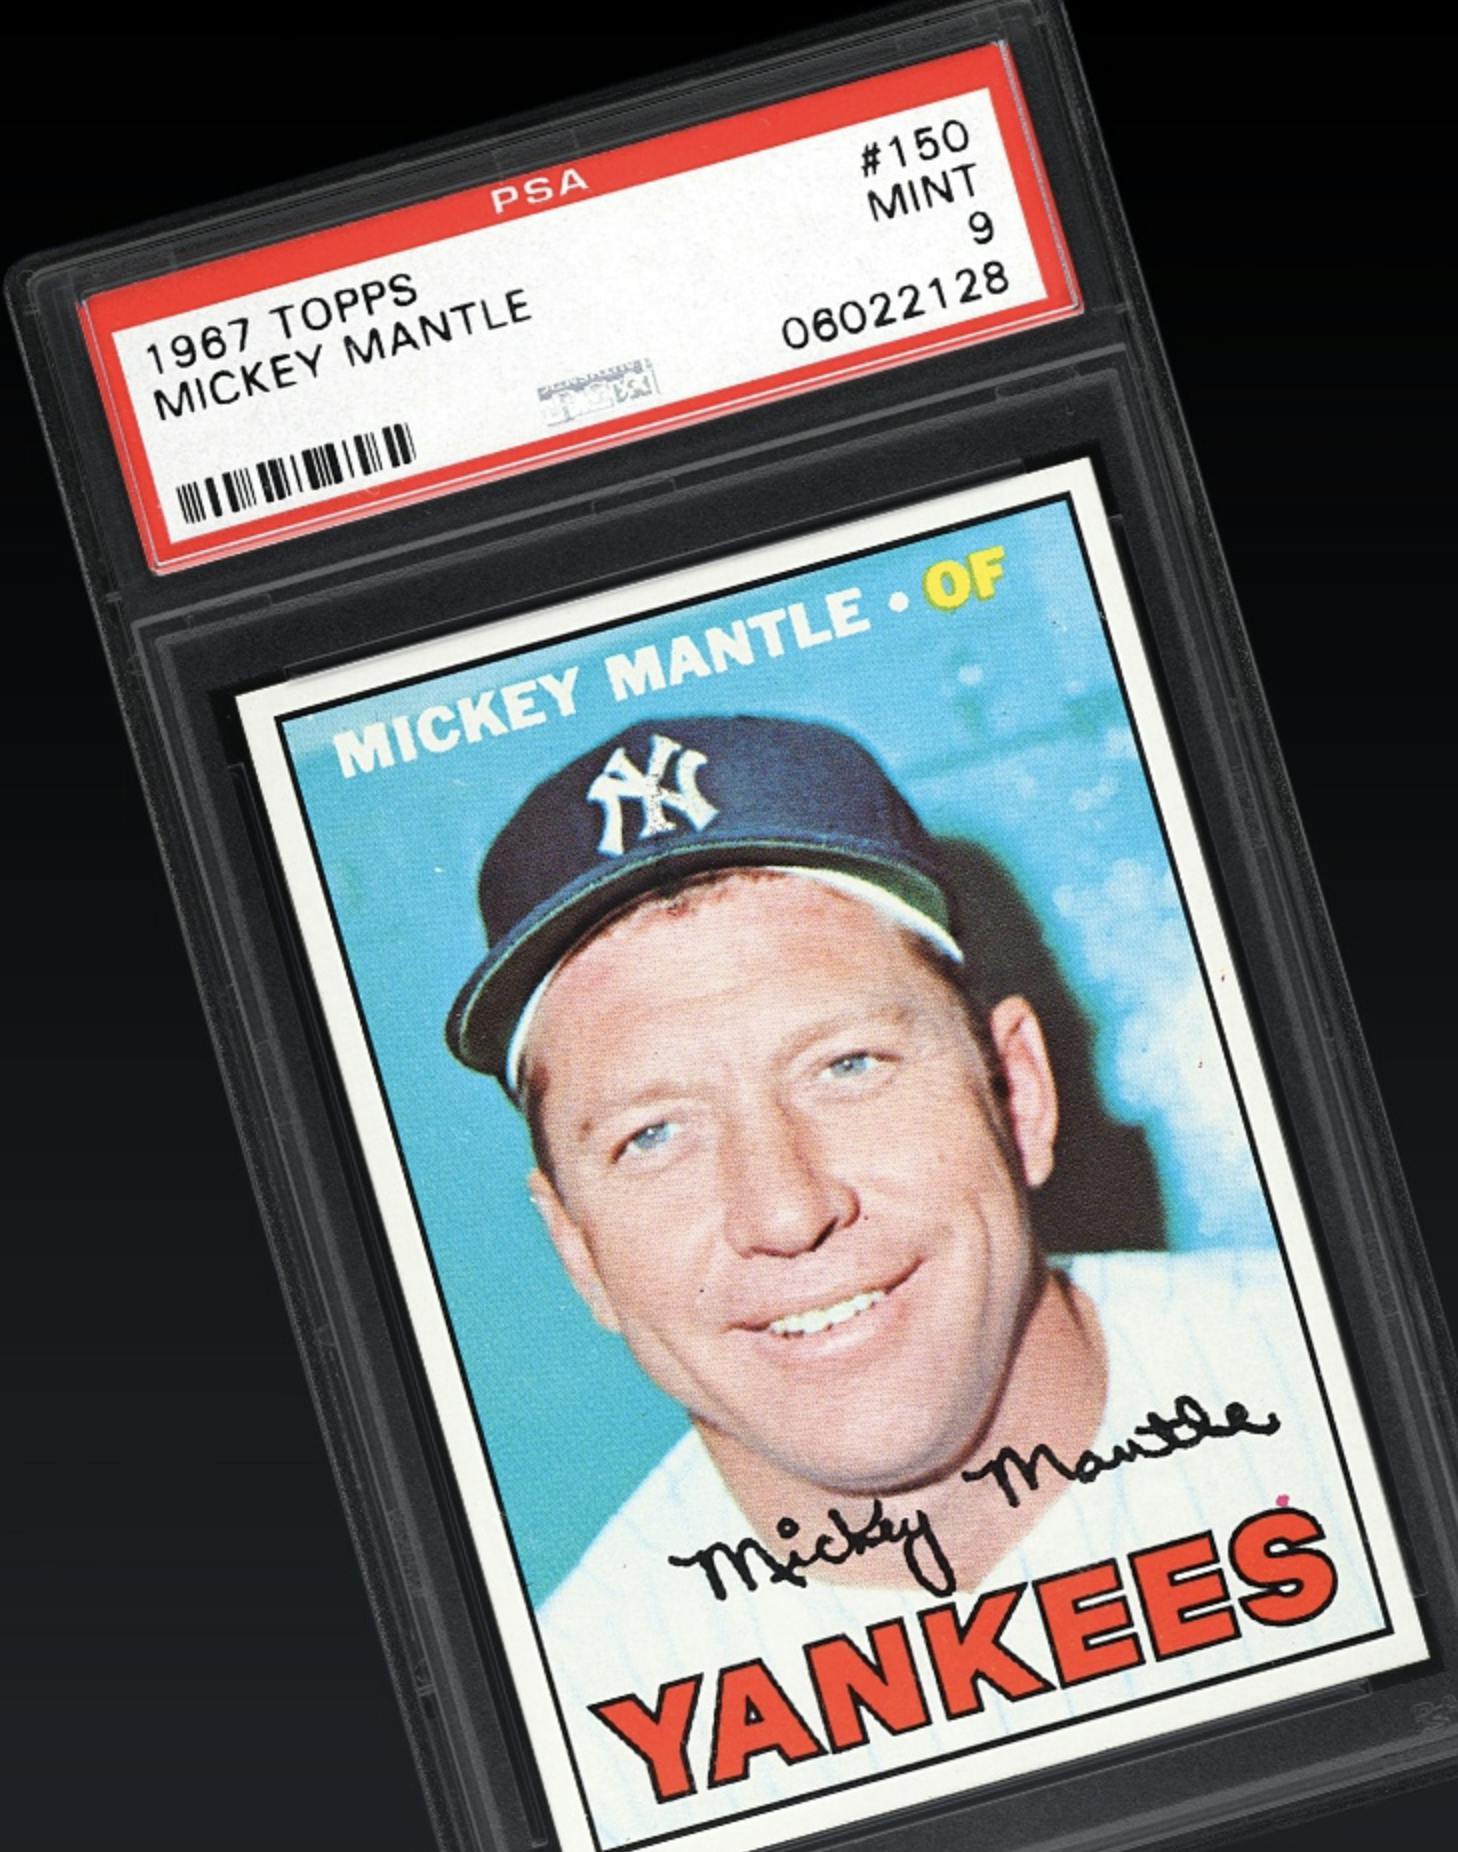 1967 mickey mantle